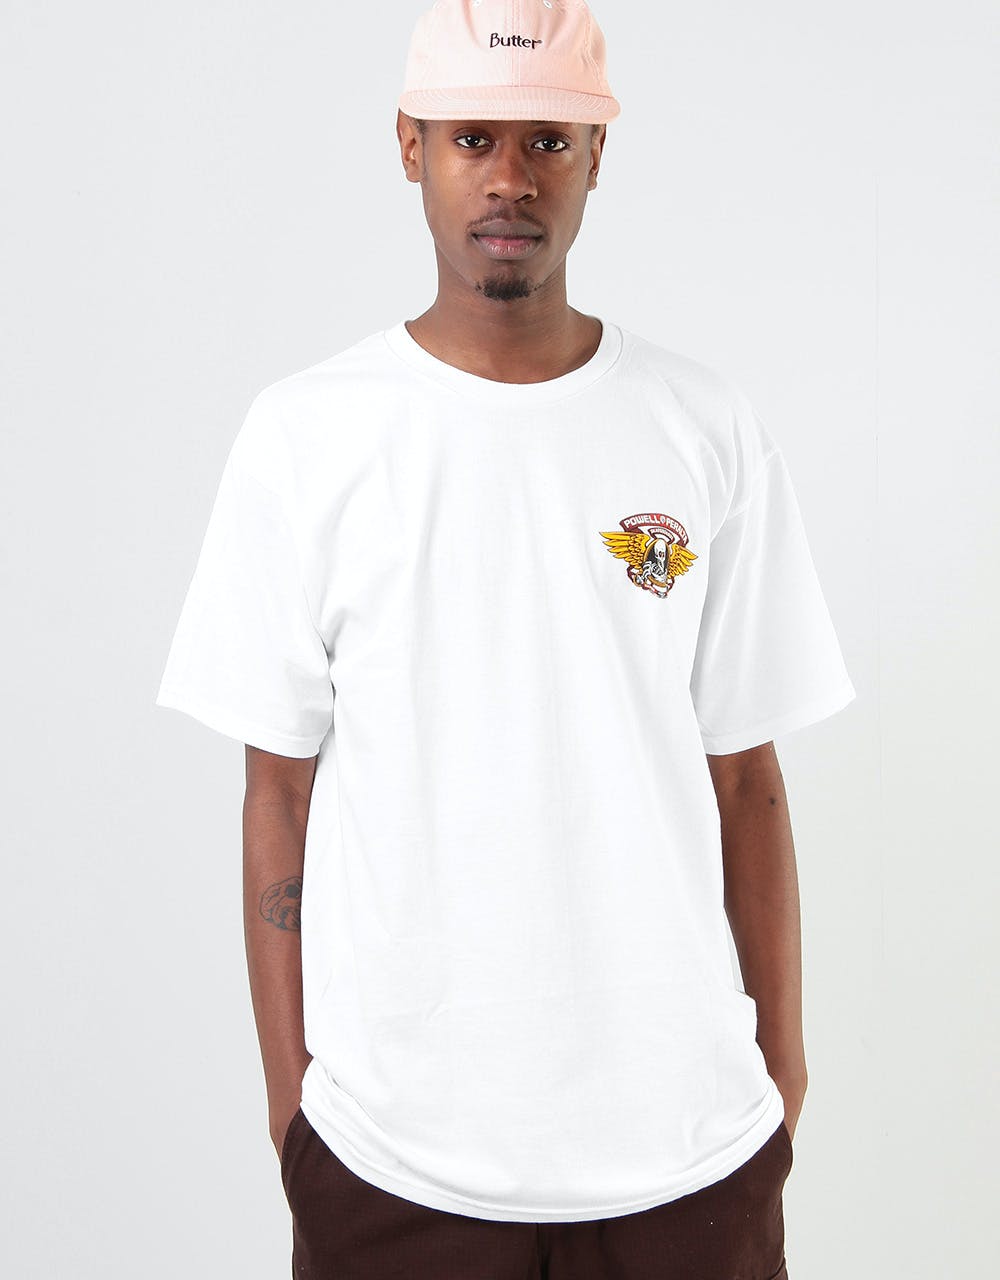 Powell Peralta Winged Ripper T-Shirt - White